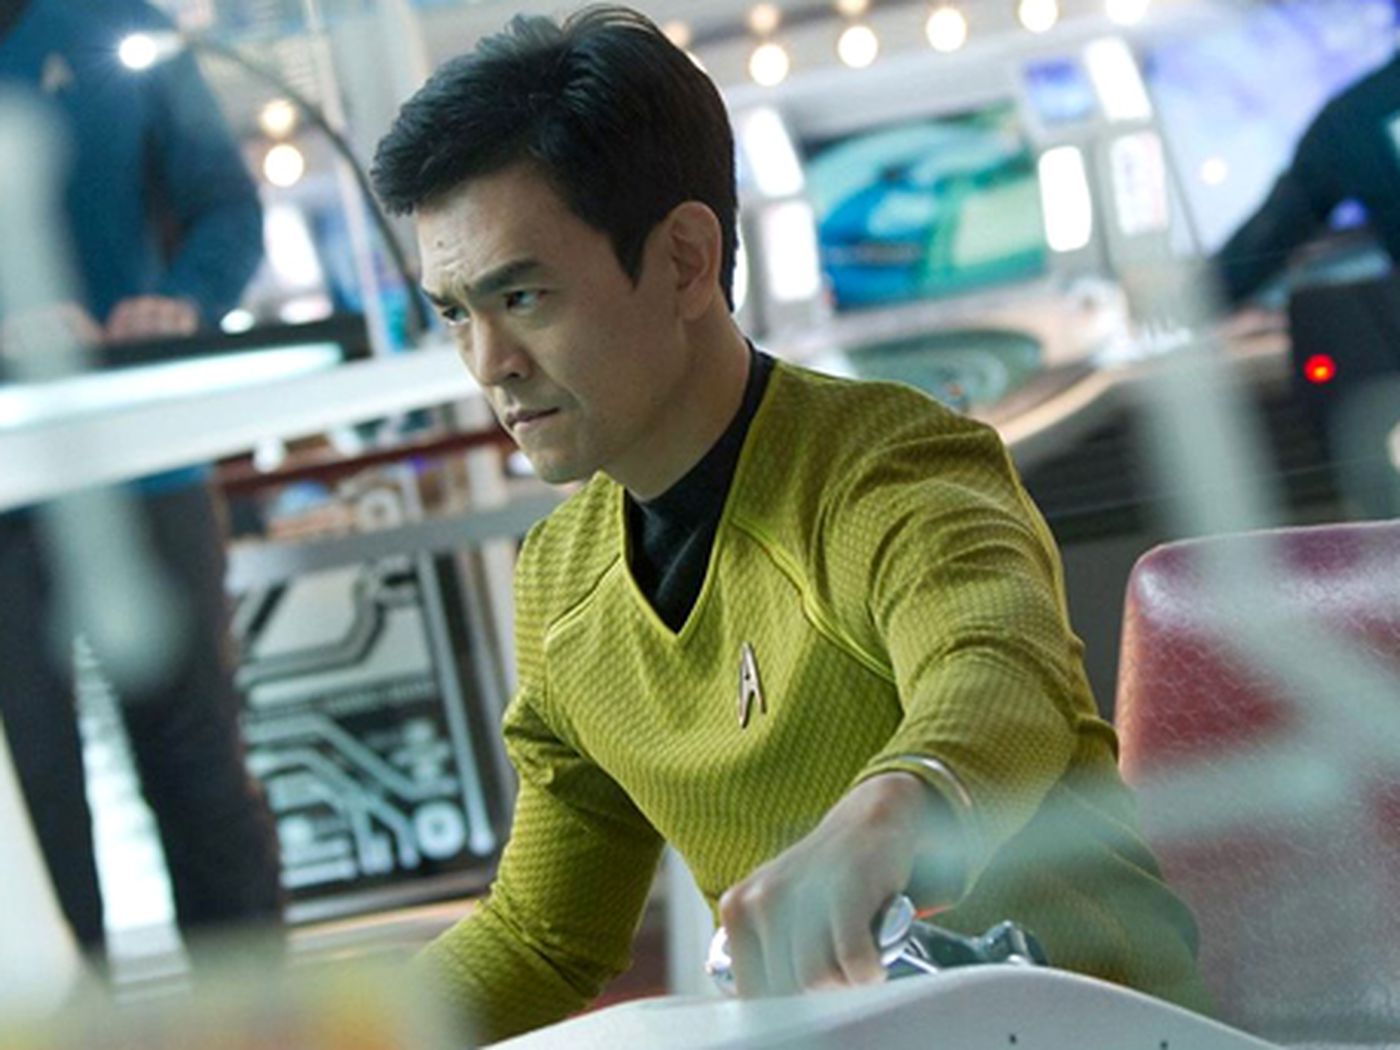 Hikaru Sulu will be the first openly gay character in the Star Trek film franchise